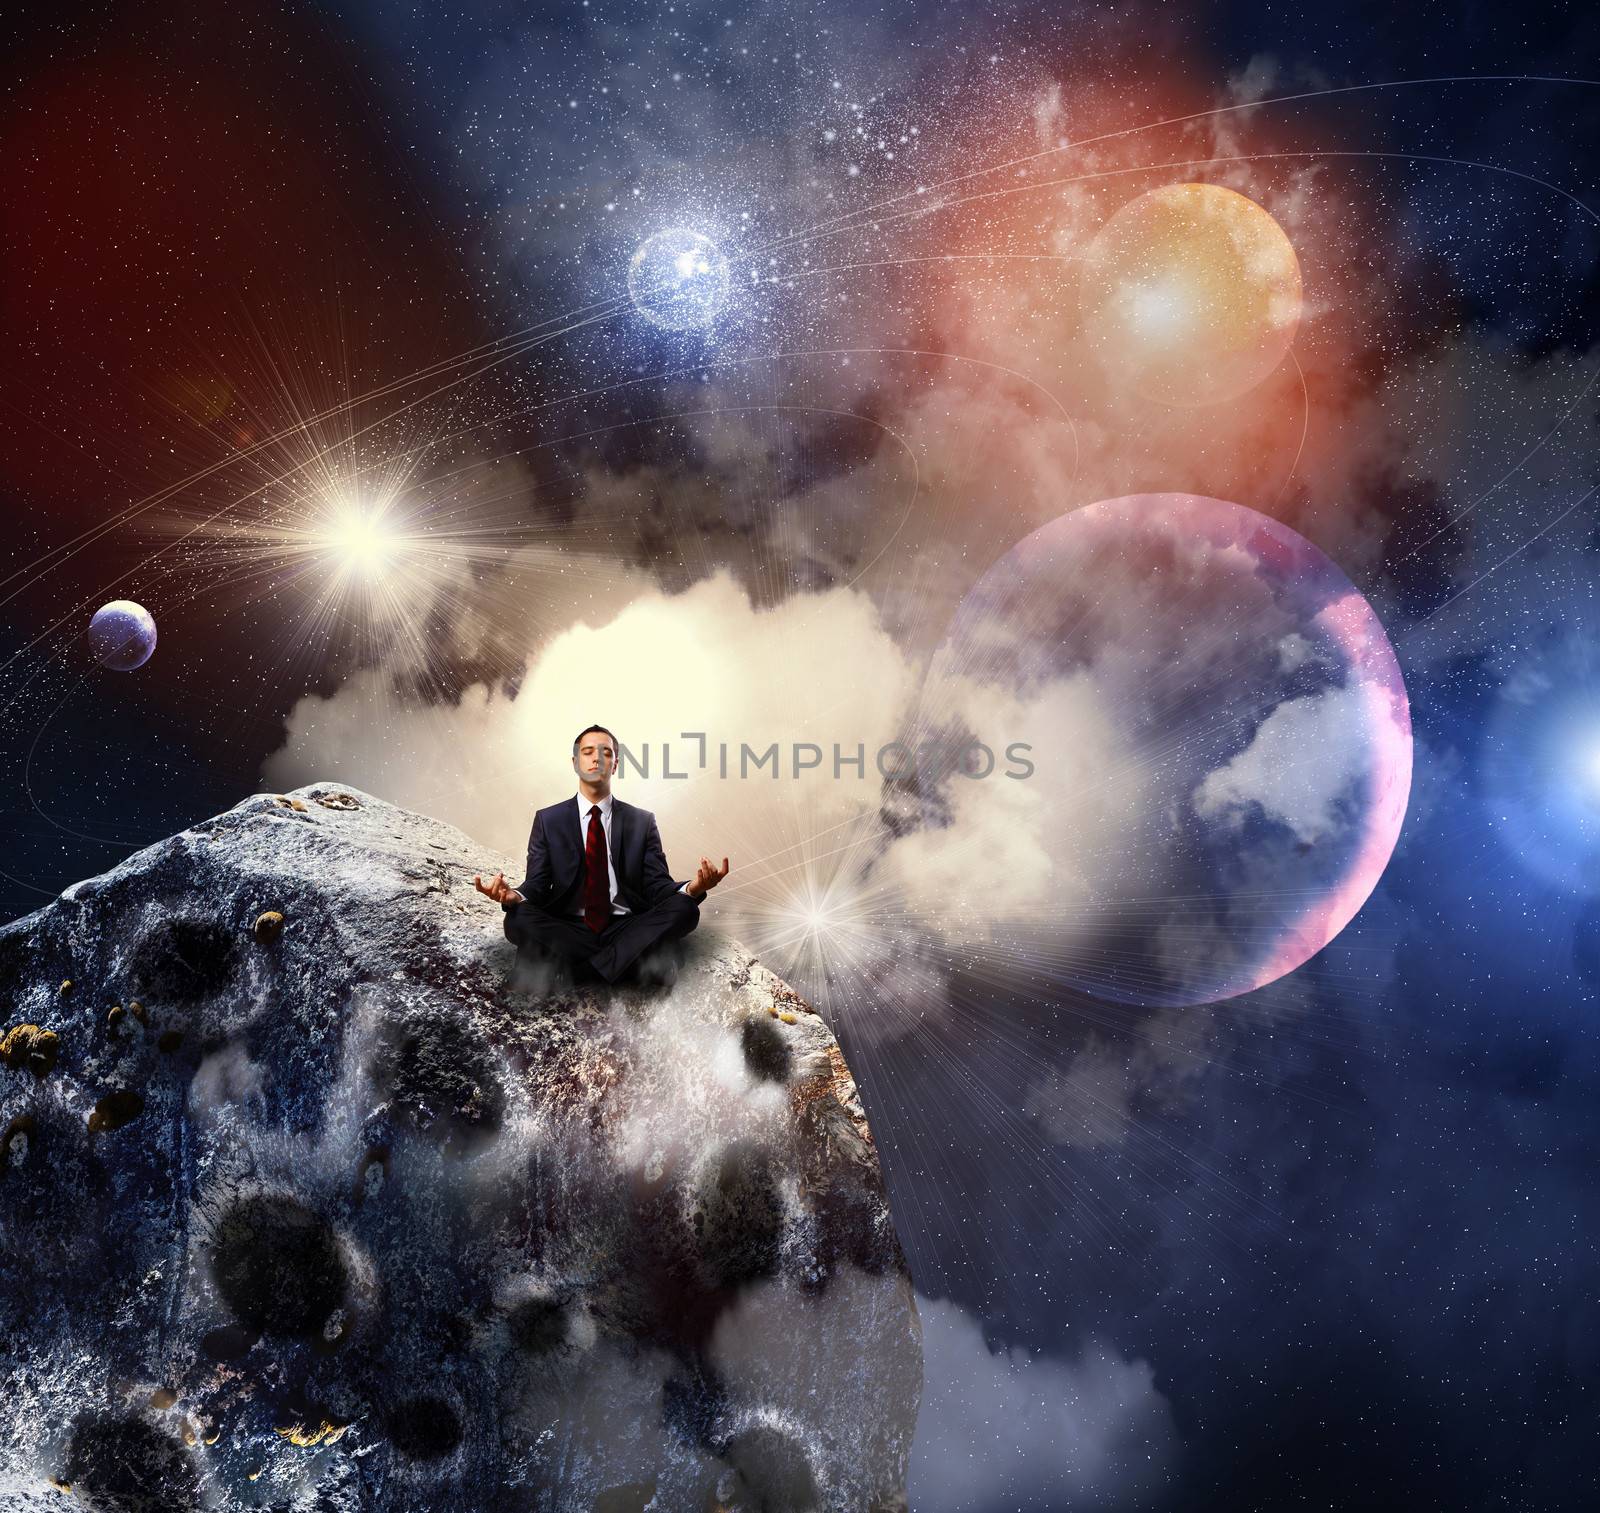 Businessman sitting in lotus flower position against space background